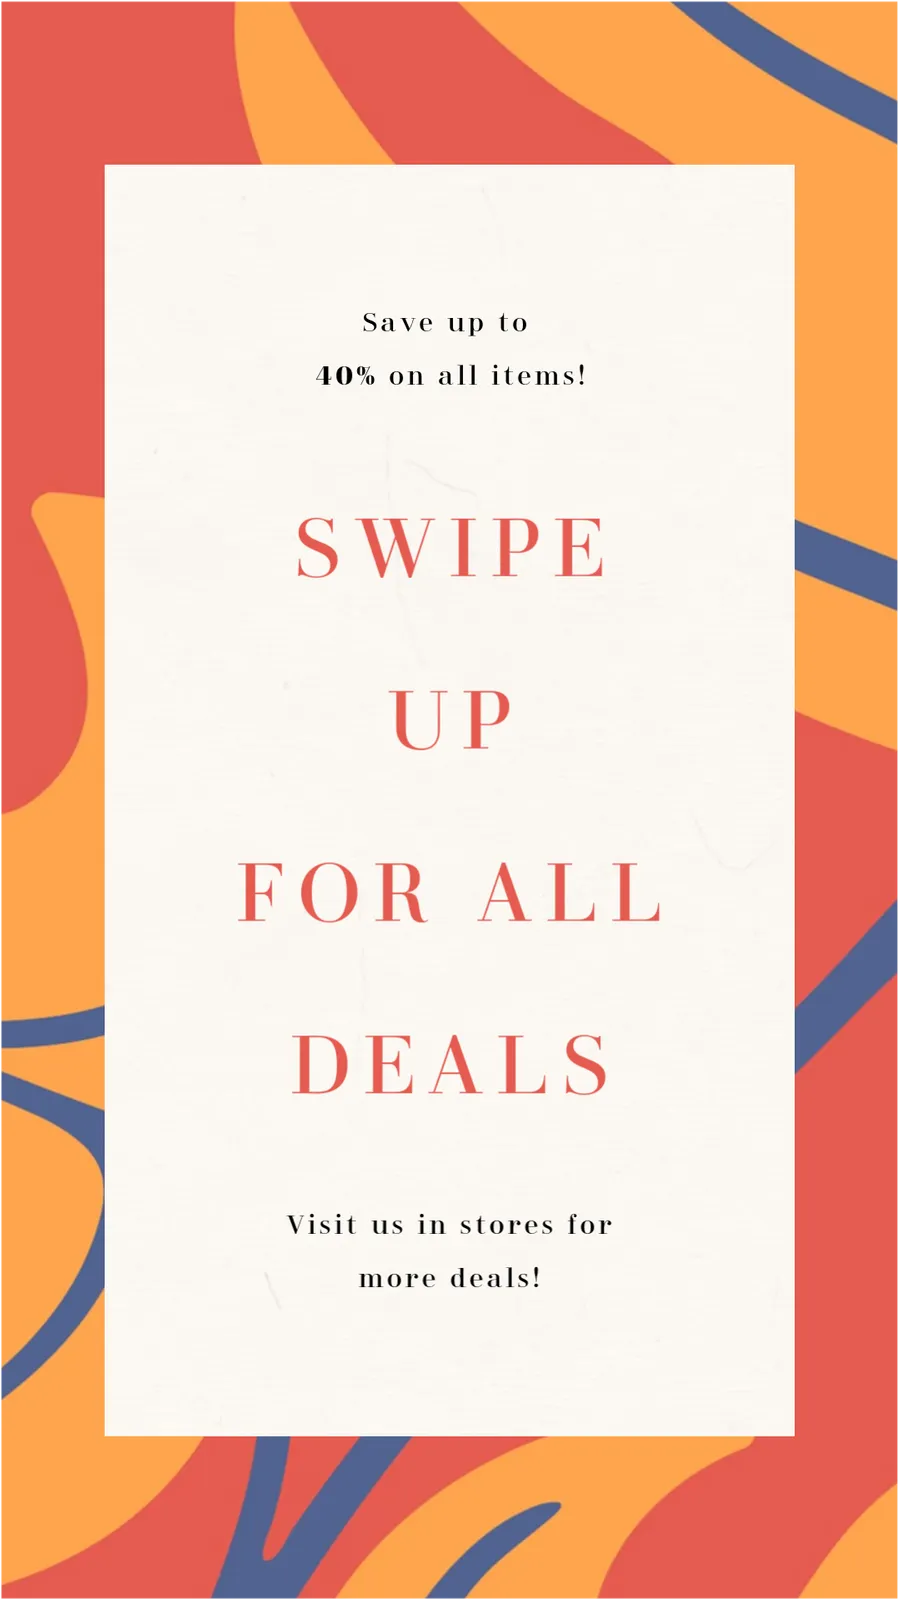 Swipe Up for All Deals facebook-story template